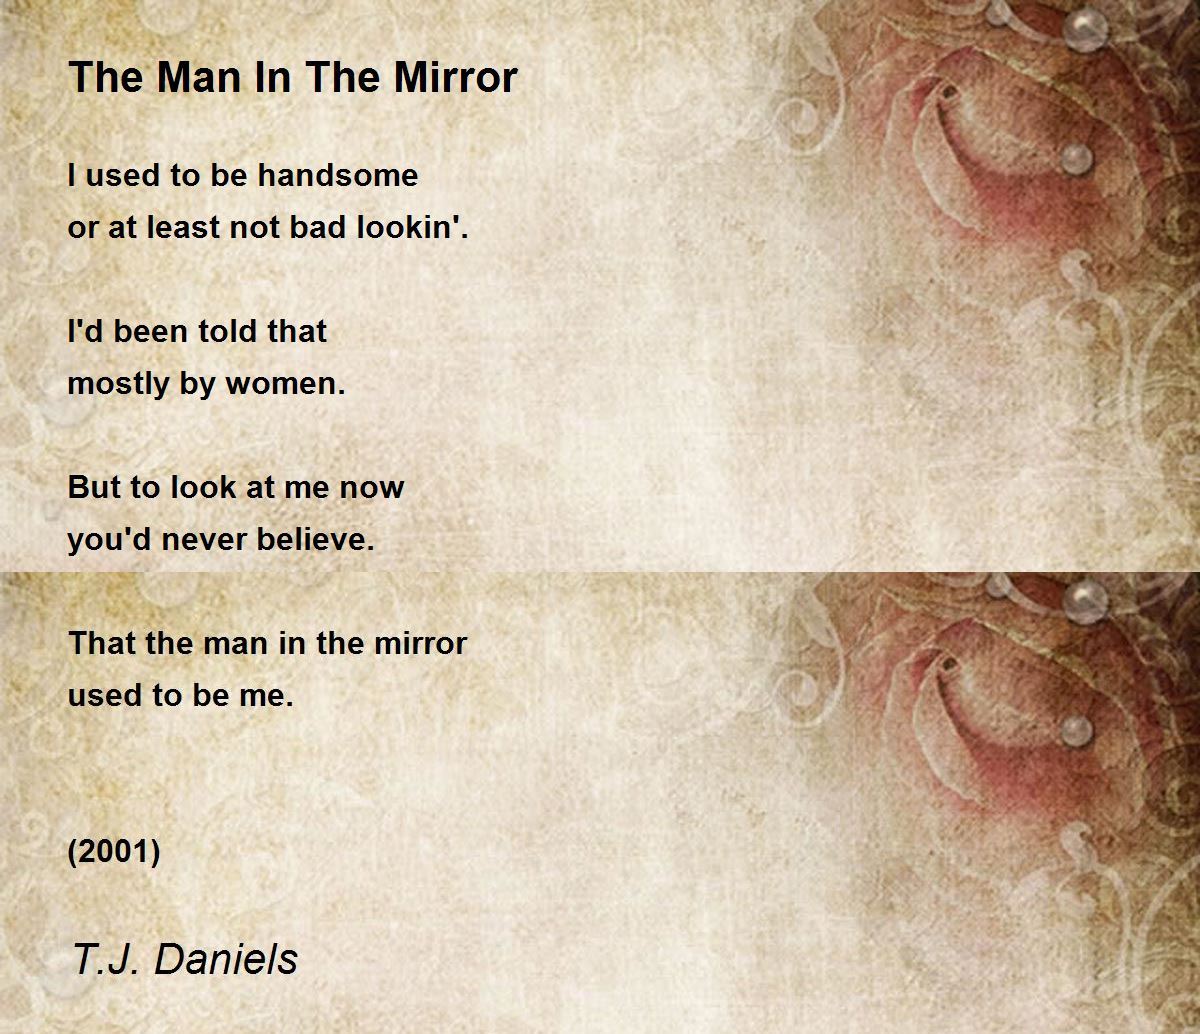 essay about man in the mirror